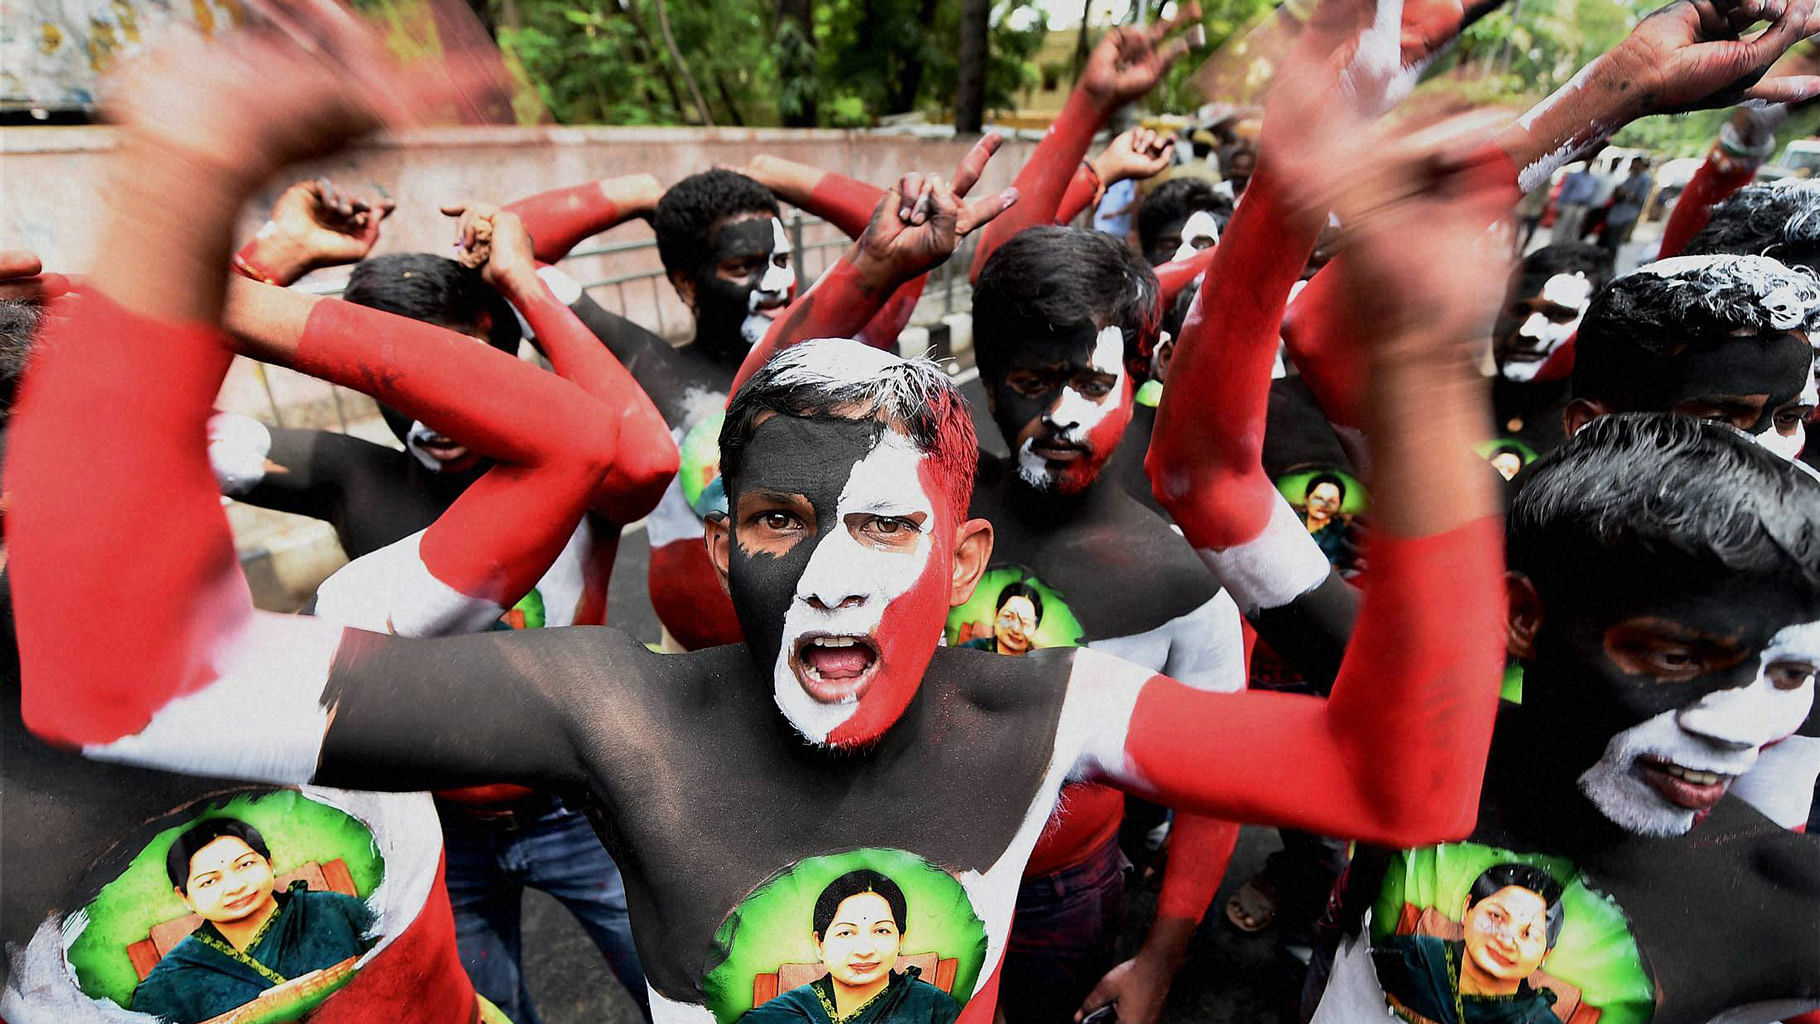 

AIADMK cadres, with their bodies painted, celebrate the party’s victory  outside Chief Minister J Jayalalithaa’s Poes Garden residence in Chennai on Thursday. (Photo: PTI)